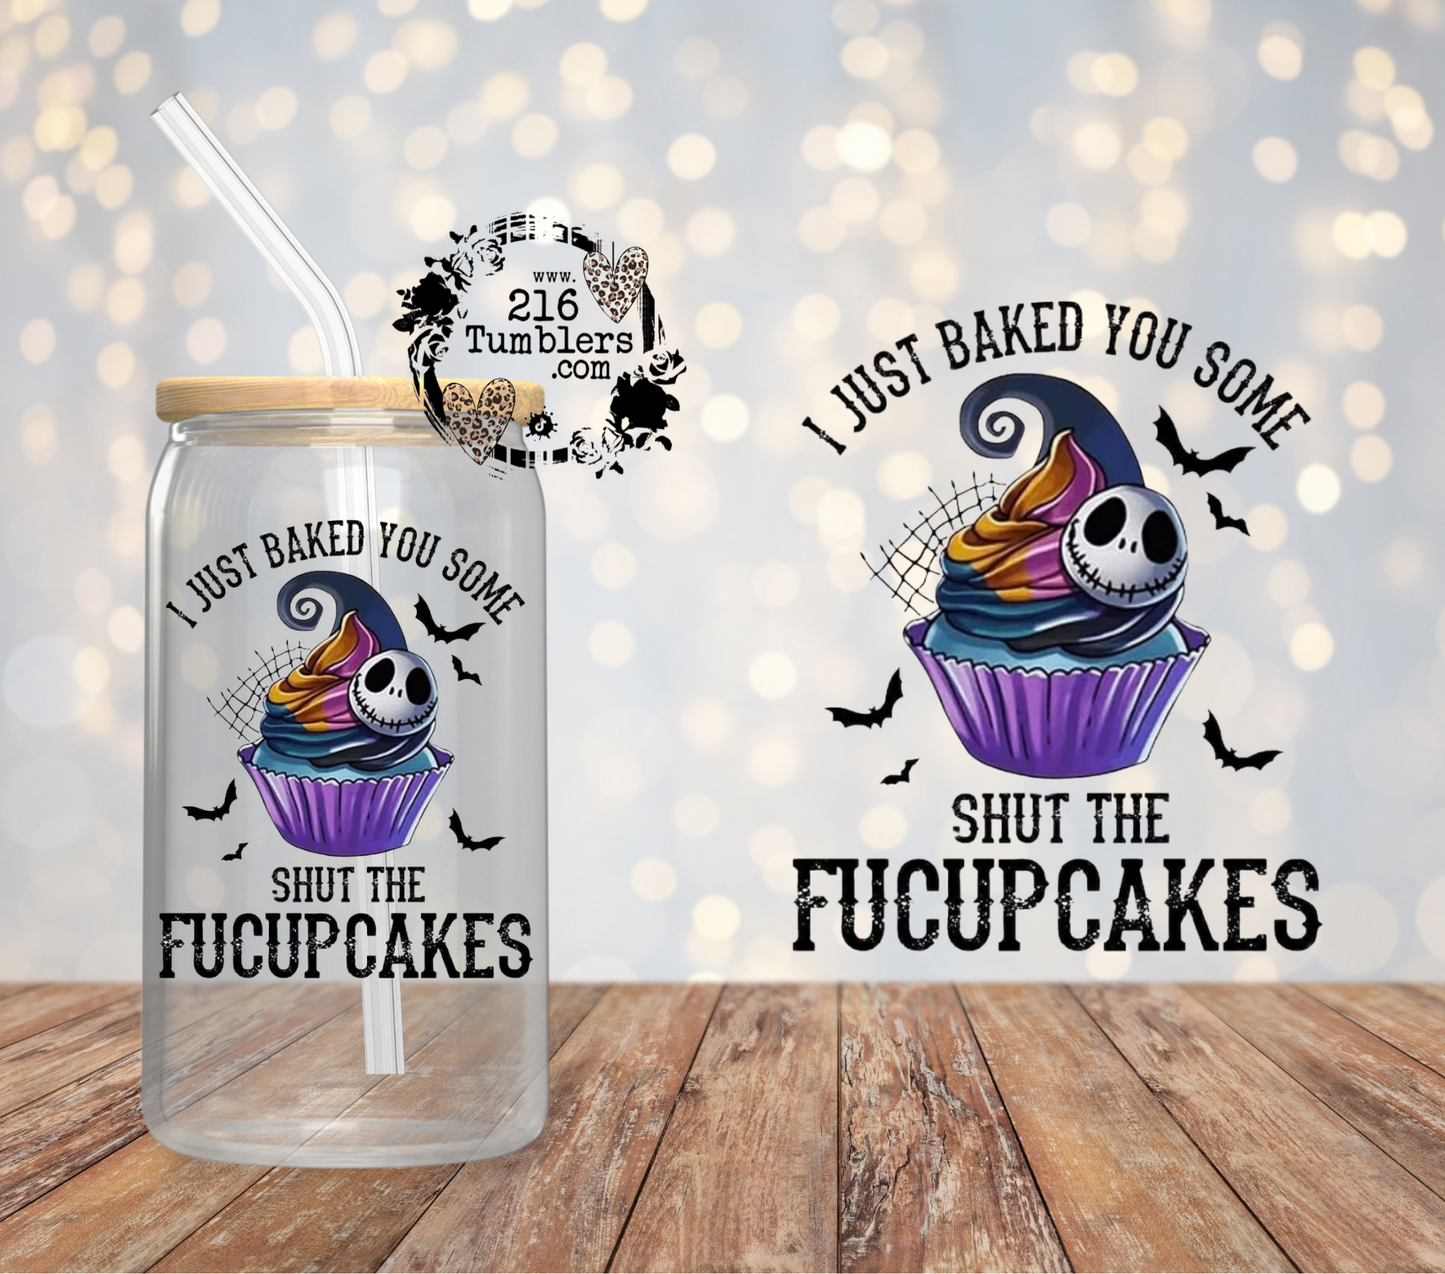 I just baked you some shut the fucupcakes